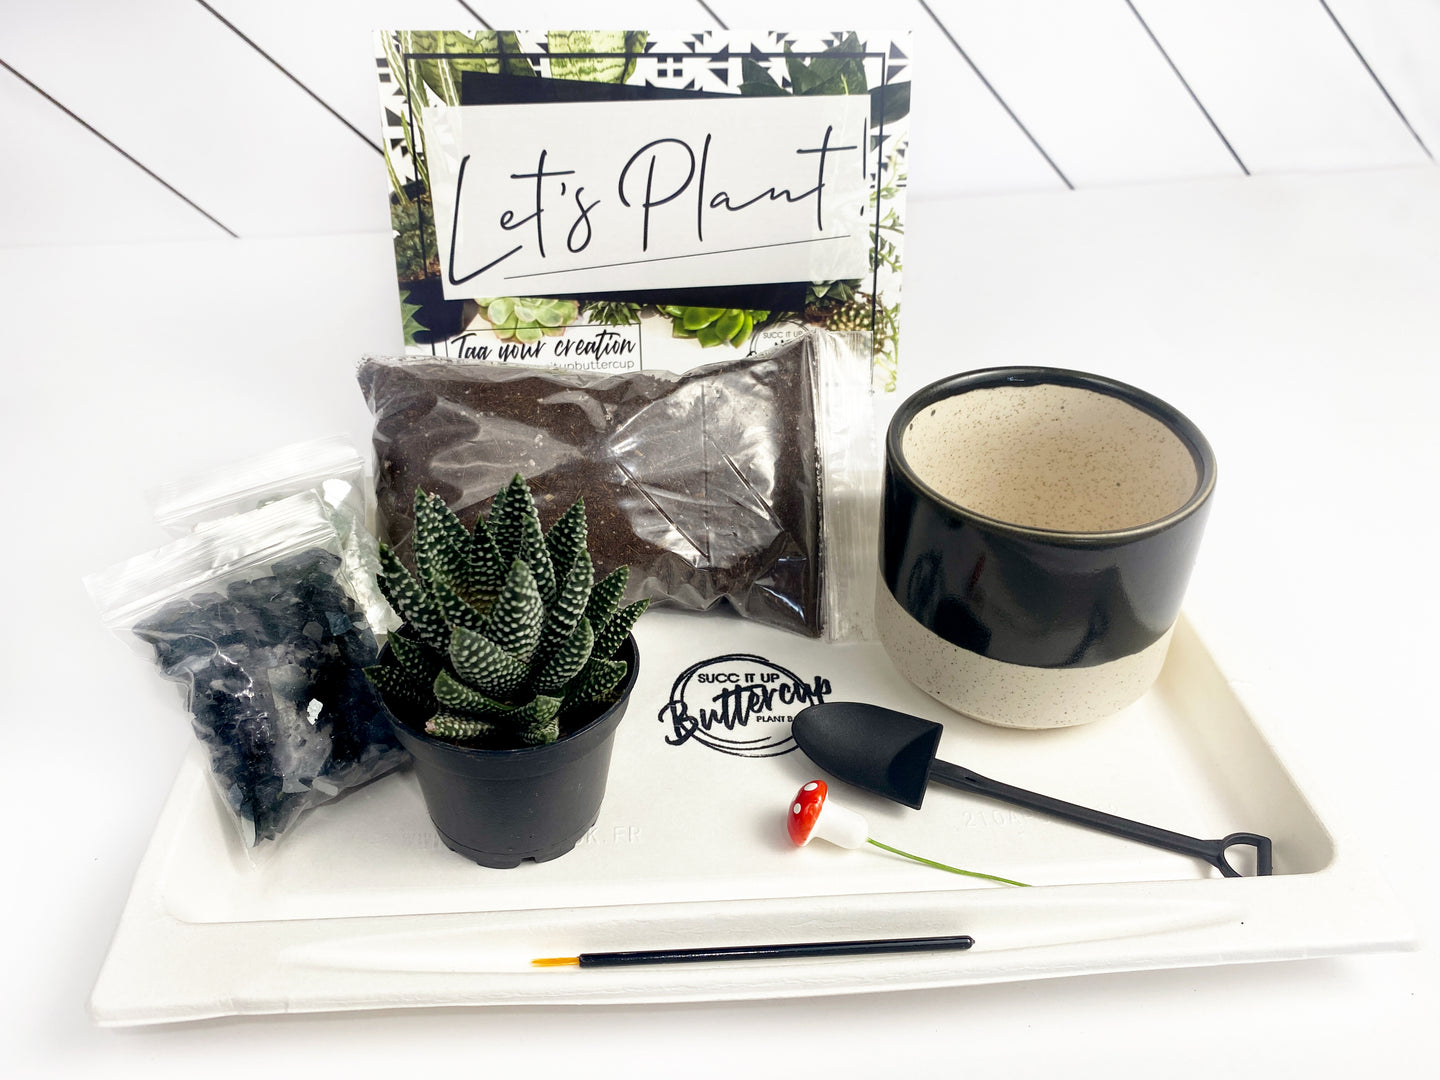 'What the Succ' Gift Box- 1 succulent